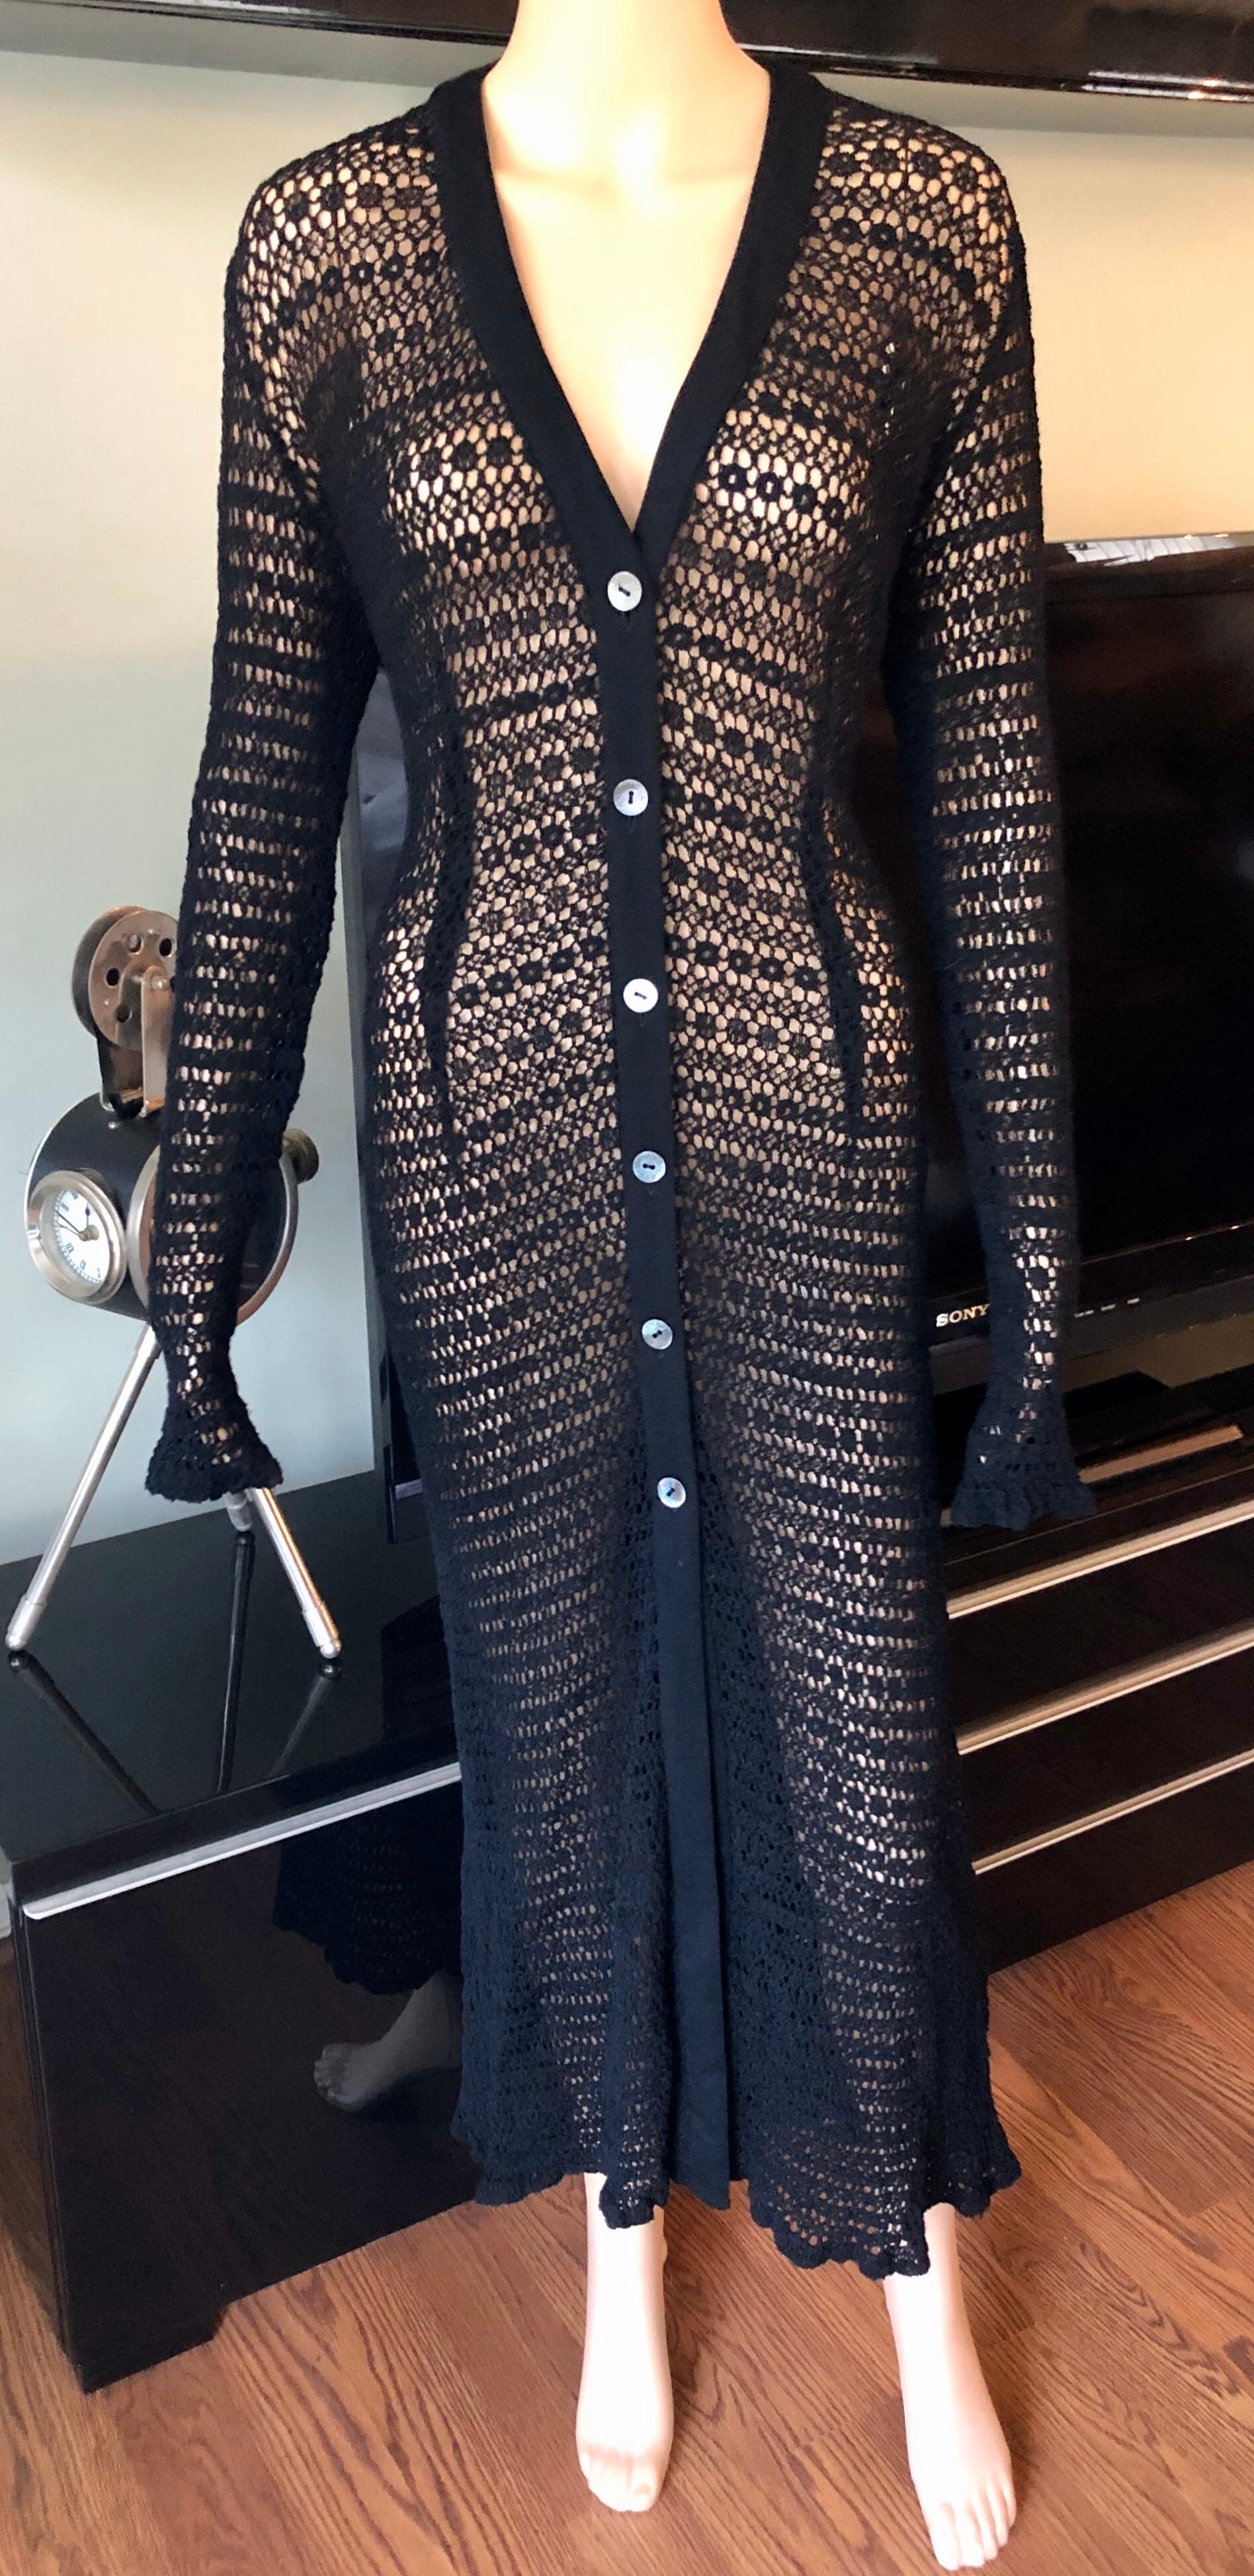 Dolce & Gabbana Vintage 1990's Sheer Open Knit Crochet Fishnet Black Maxi Dress M/L

Dolce & Gabbana vintage dress featuring V-neck, button closures at center front neckline and open knit throughout. The size tag has been removed. The knit is very